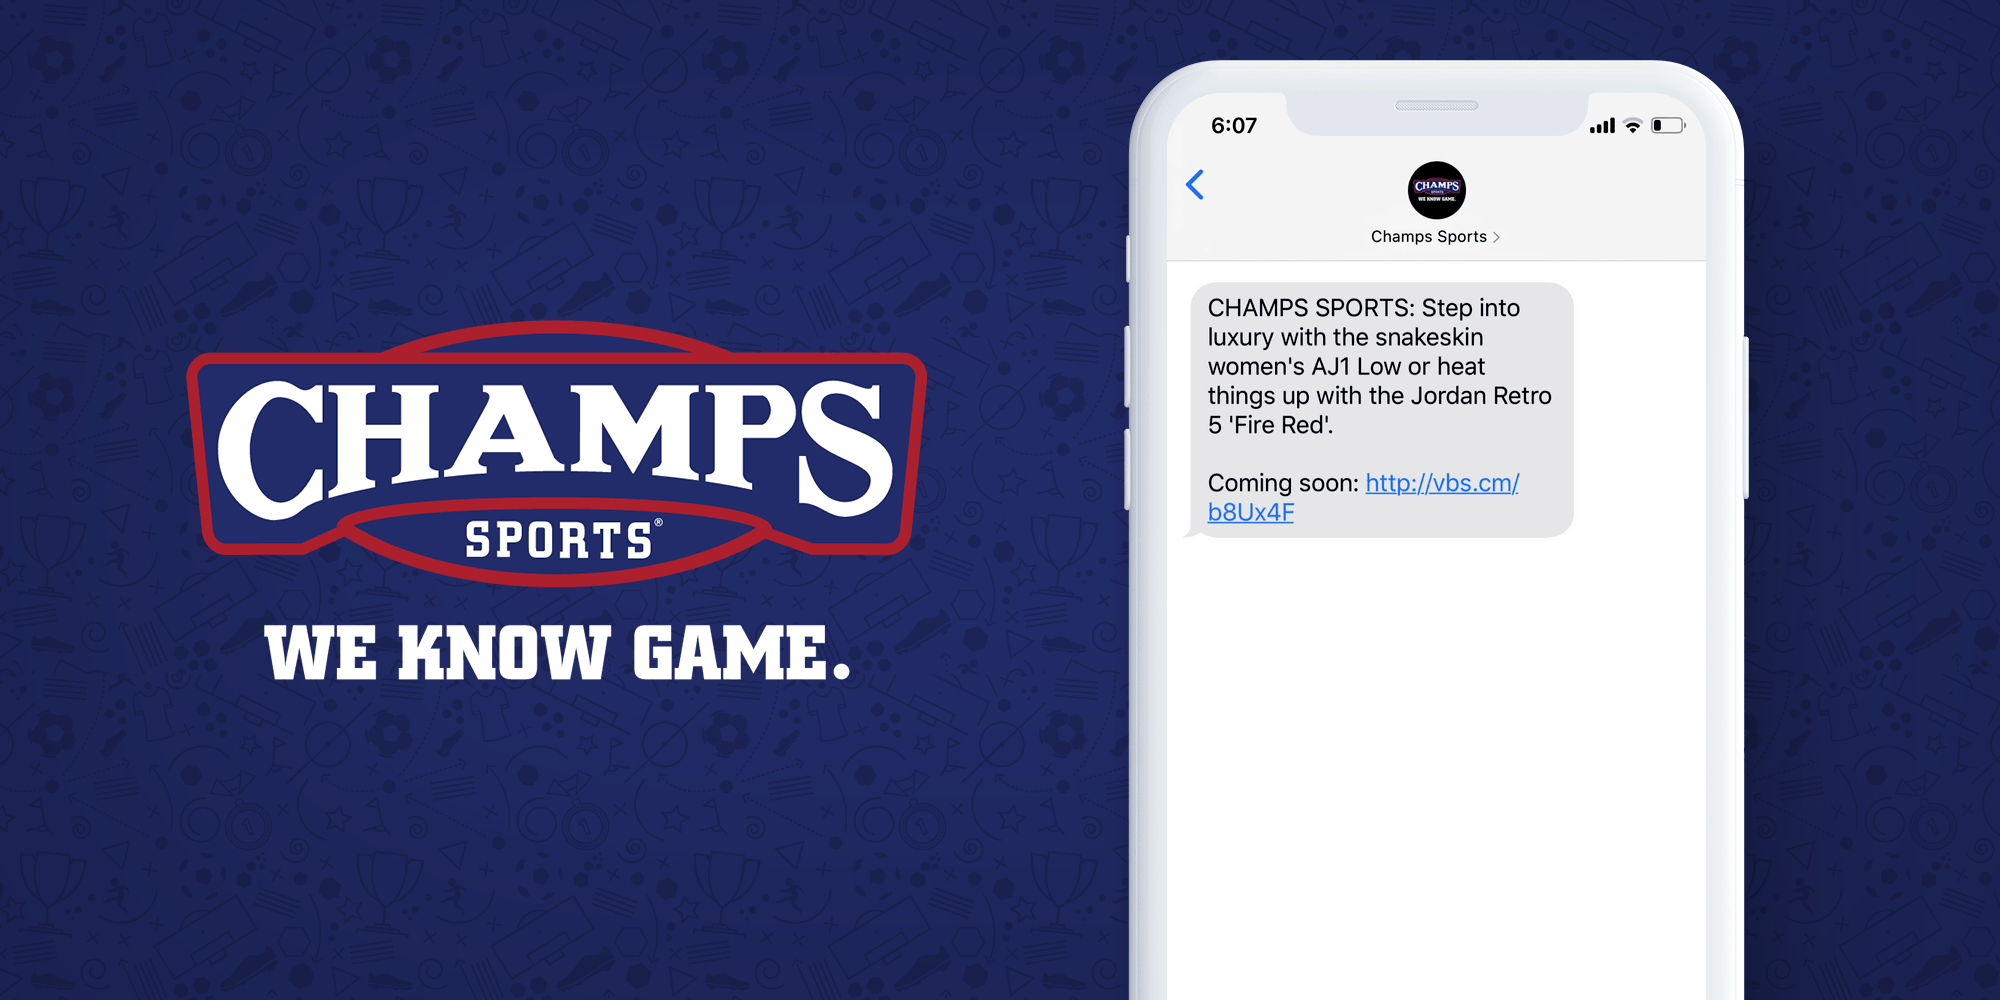 Champ’s Sports SMS Marketing Example - 50 Examples of Brands Using SMS Marketing